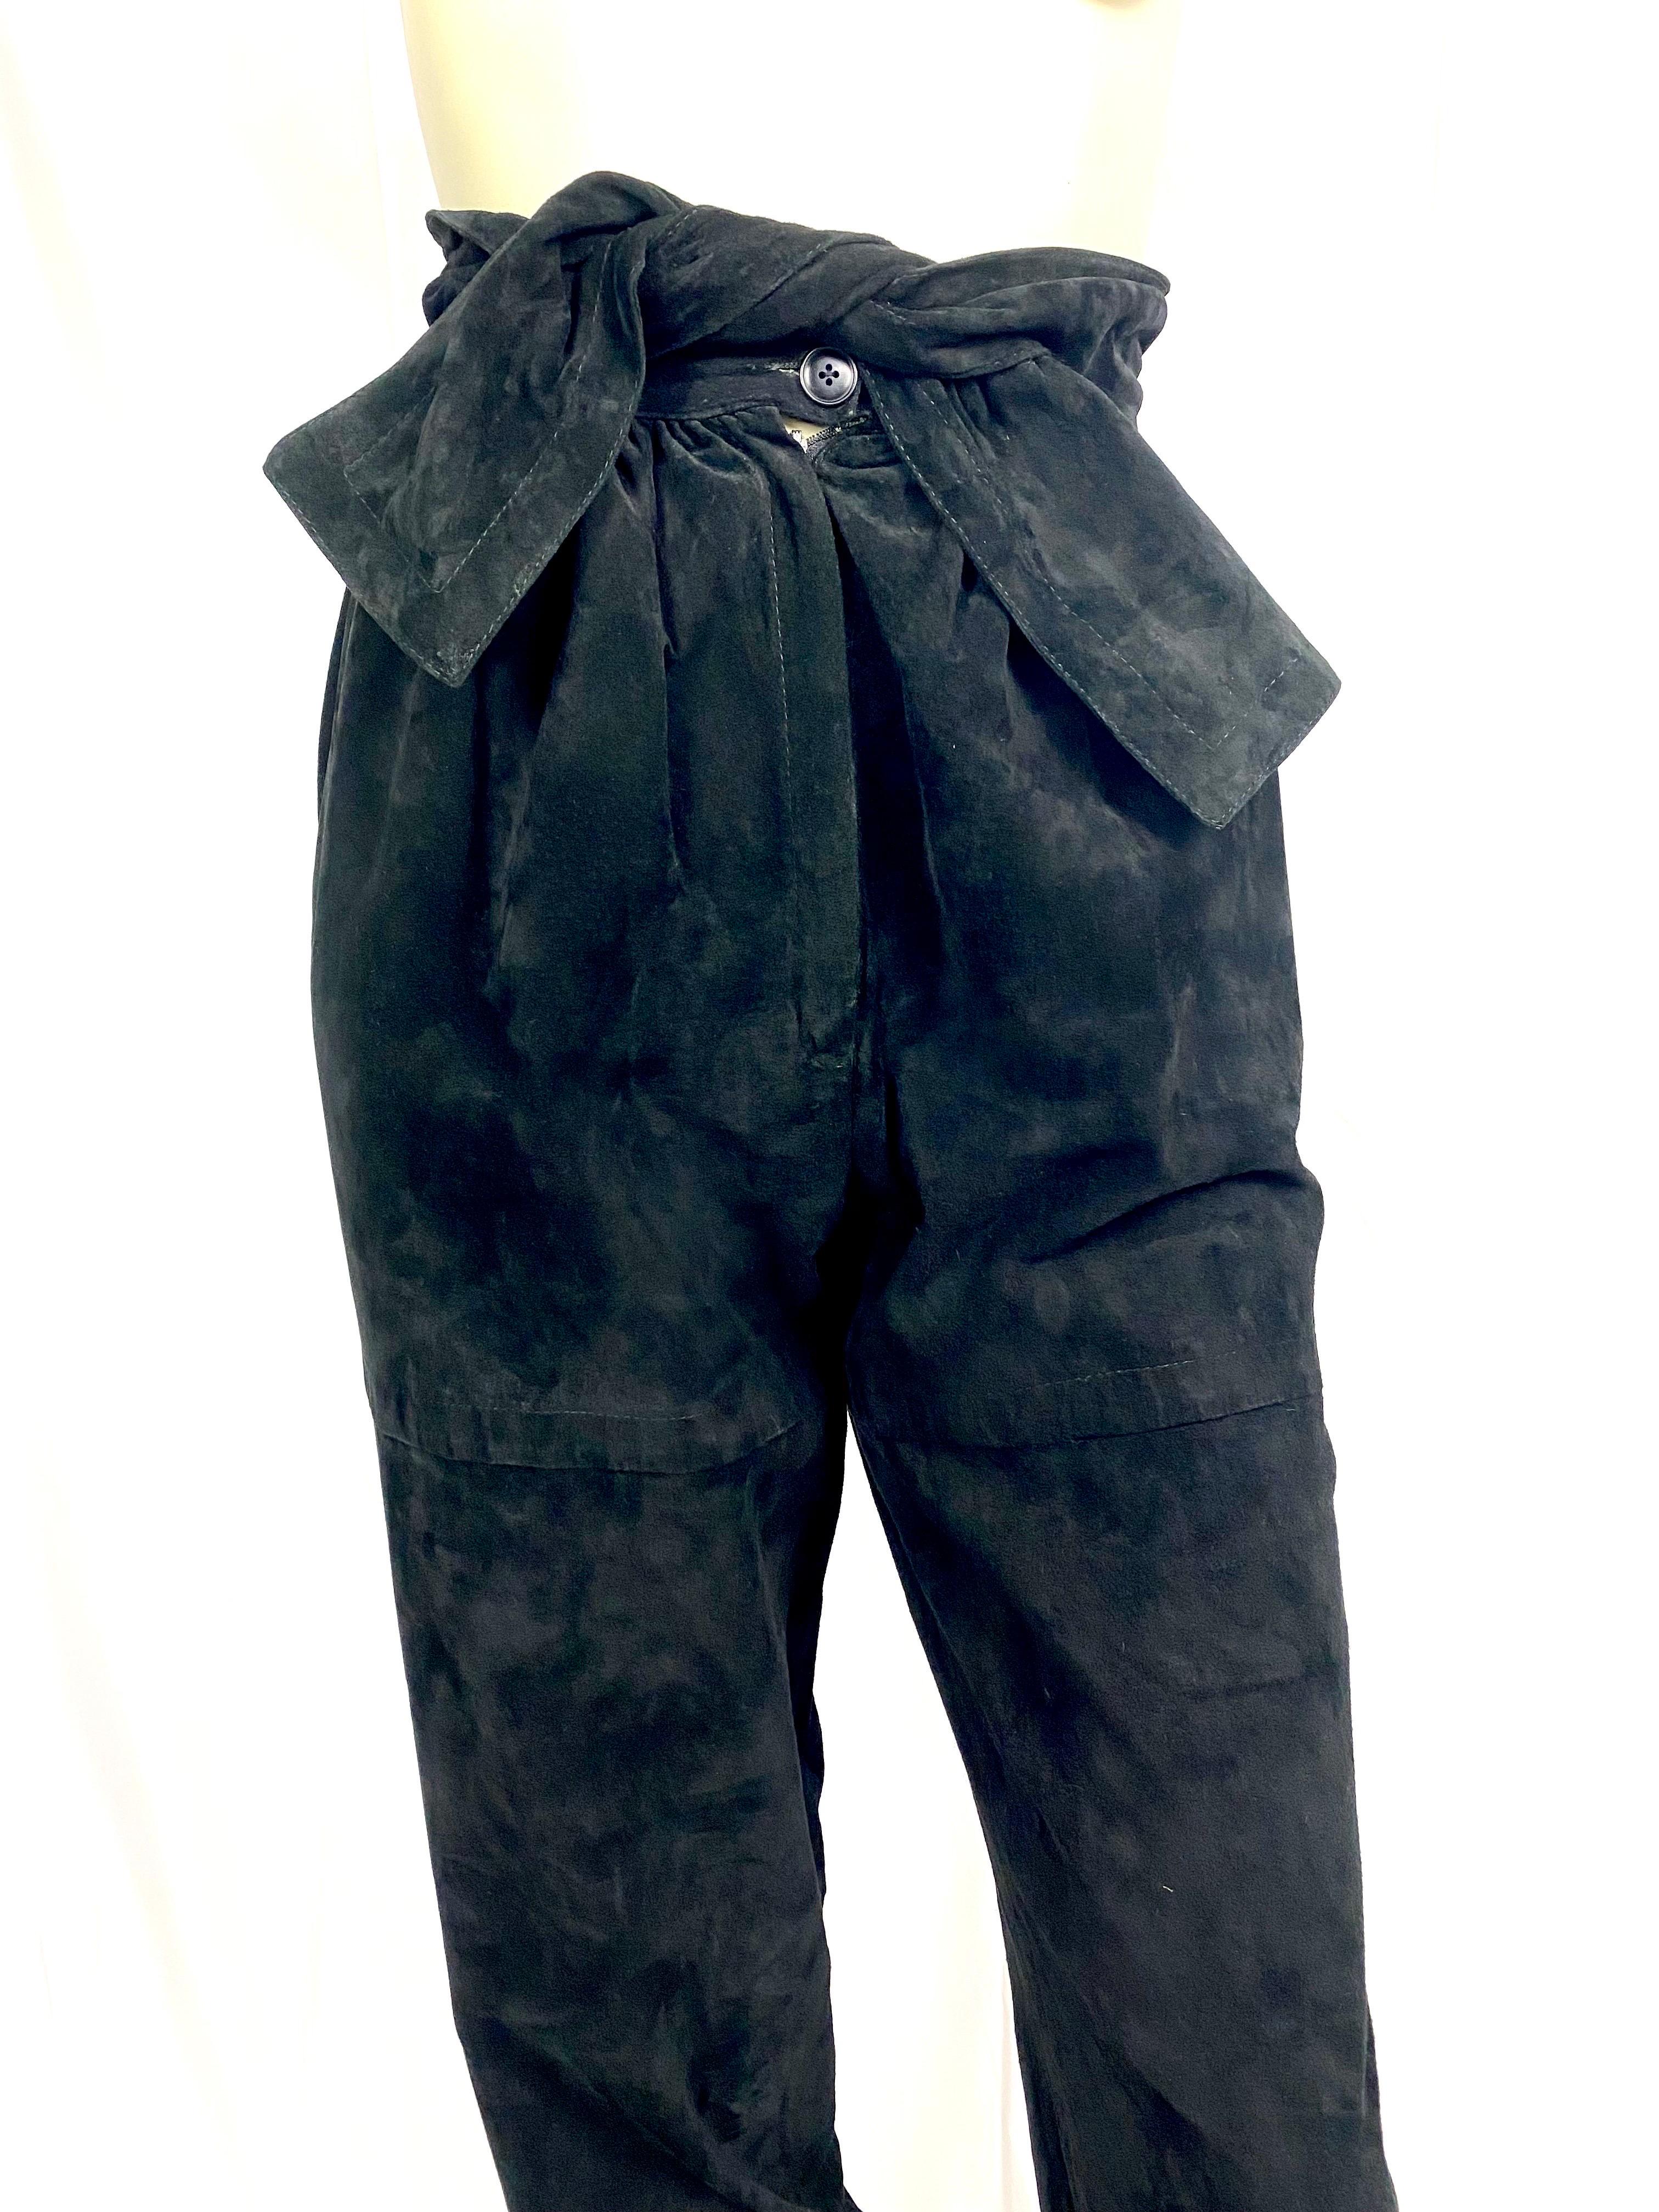 Gorgeous vintage Yves daint laurent Rive gauche black suede trousers from the 1980s.
High waist with a tie belt.
hidden zipper fly.
Made in France.
Marked size 38
Size 34cm
Hips 53cm
Waist / inseam 37cm
Thigh 31cm
belt width 11cm
Total length